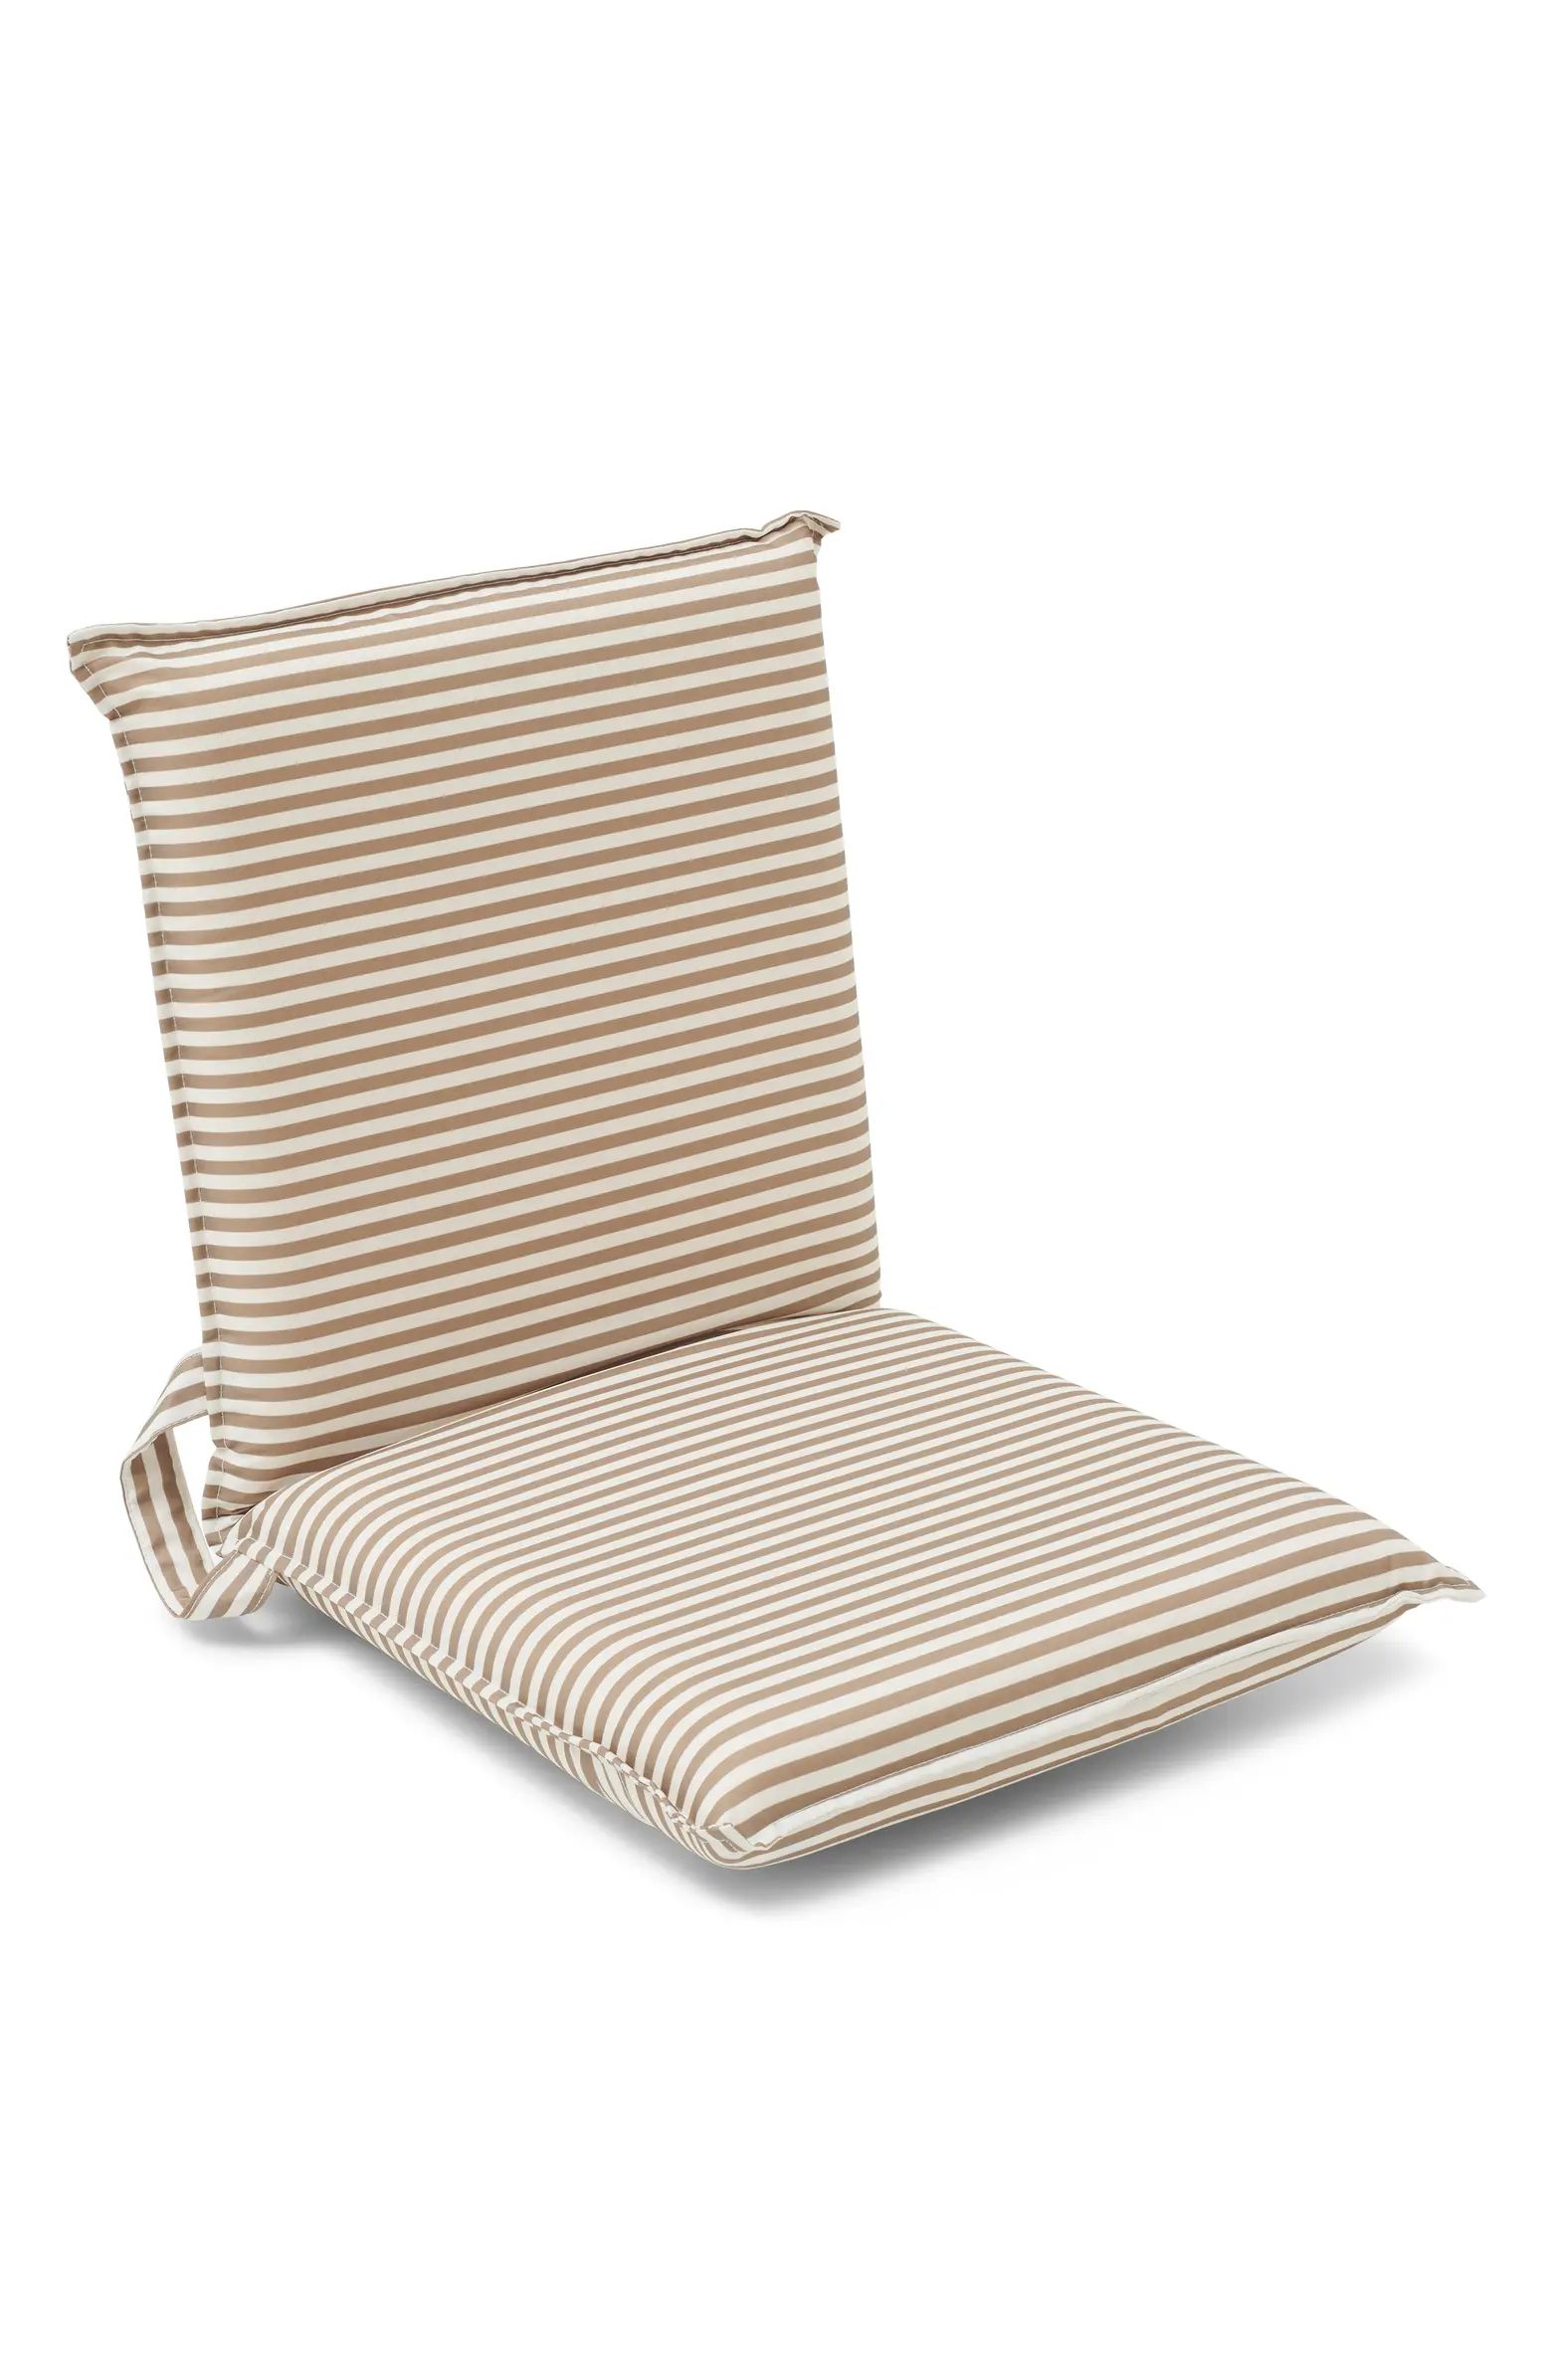 The Vacay Lean Back Beach Chair | Nordstrom